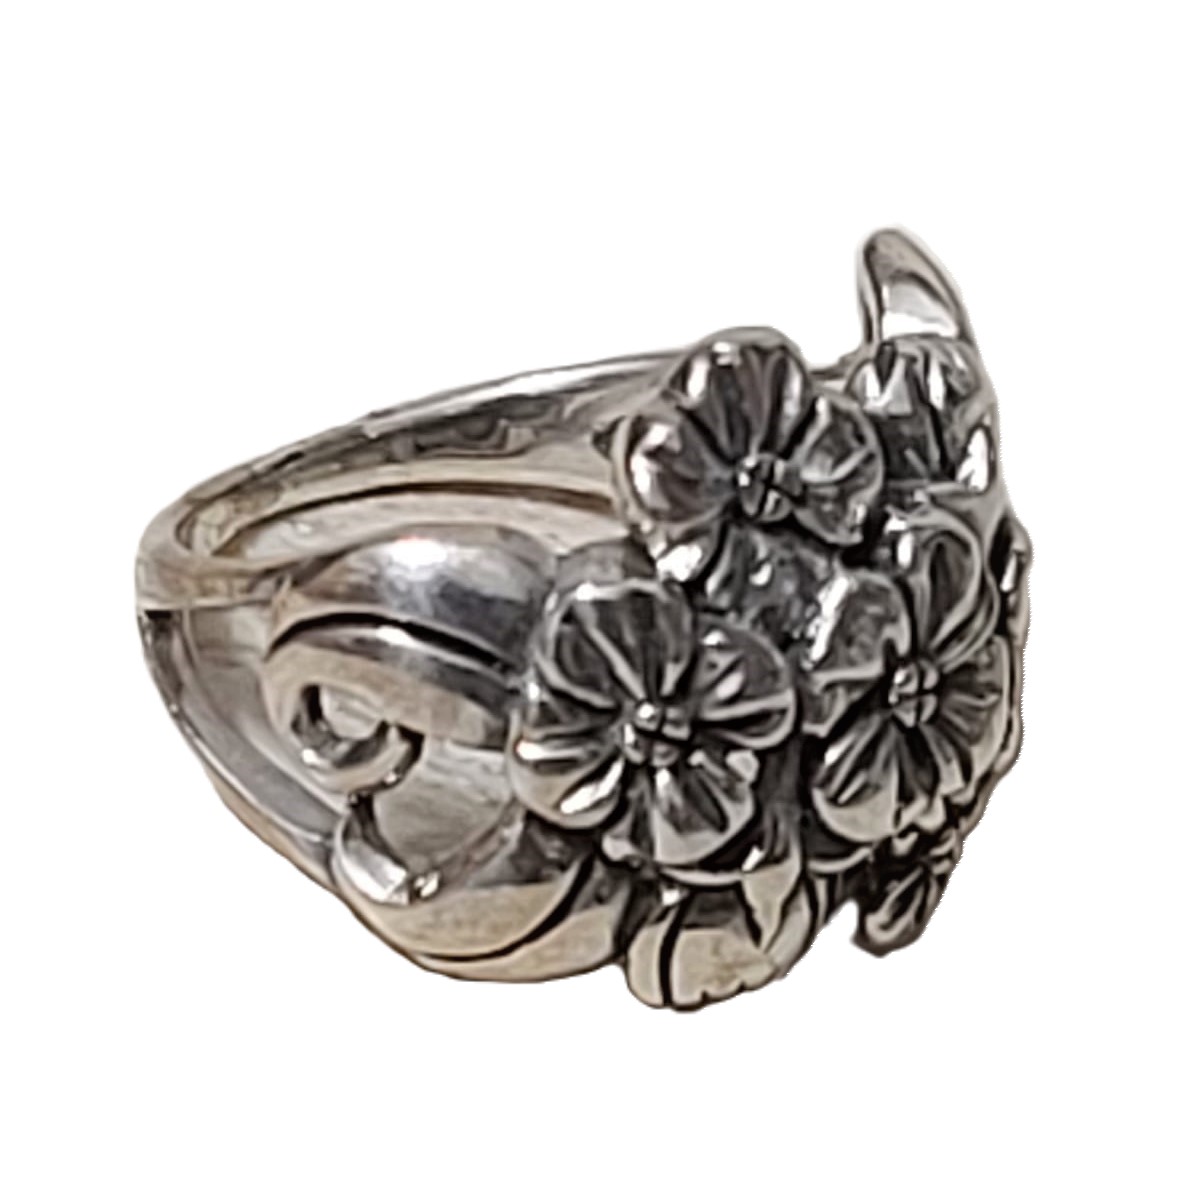 Floral Cluster 925 Sterling Silver Ring Size 7